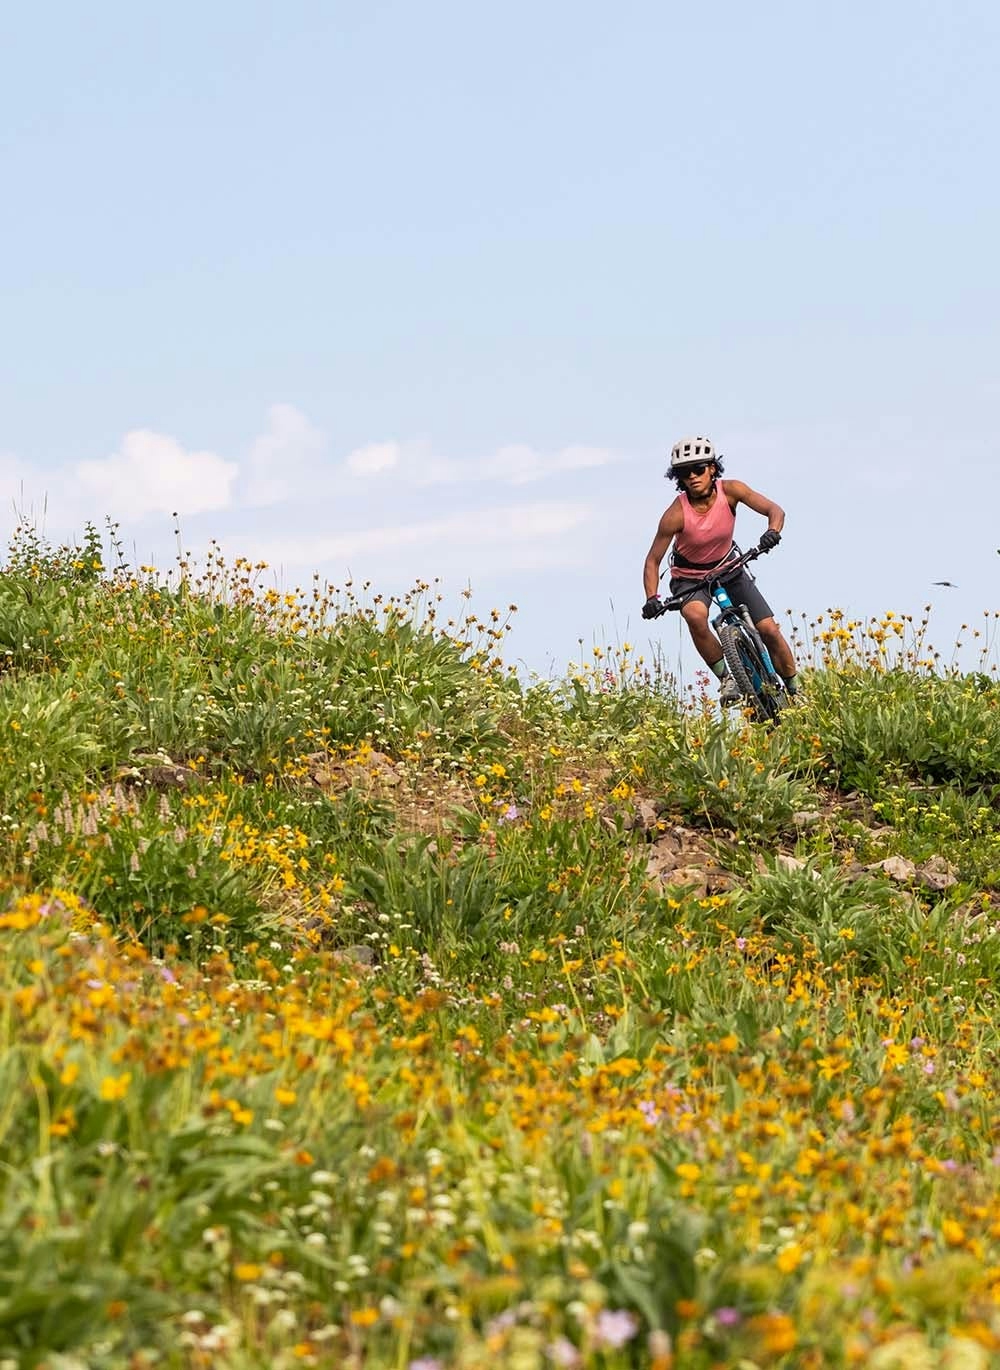 Emilé Newman riding her mountain bike on a singletrack trail surrounded by flowers